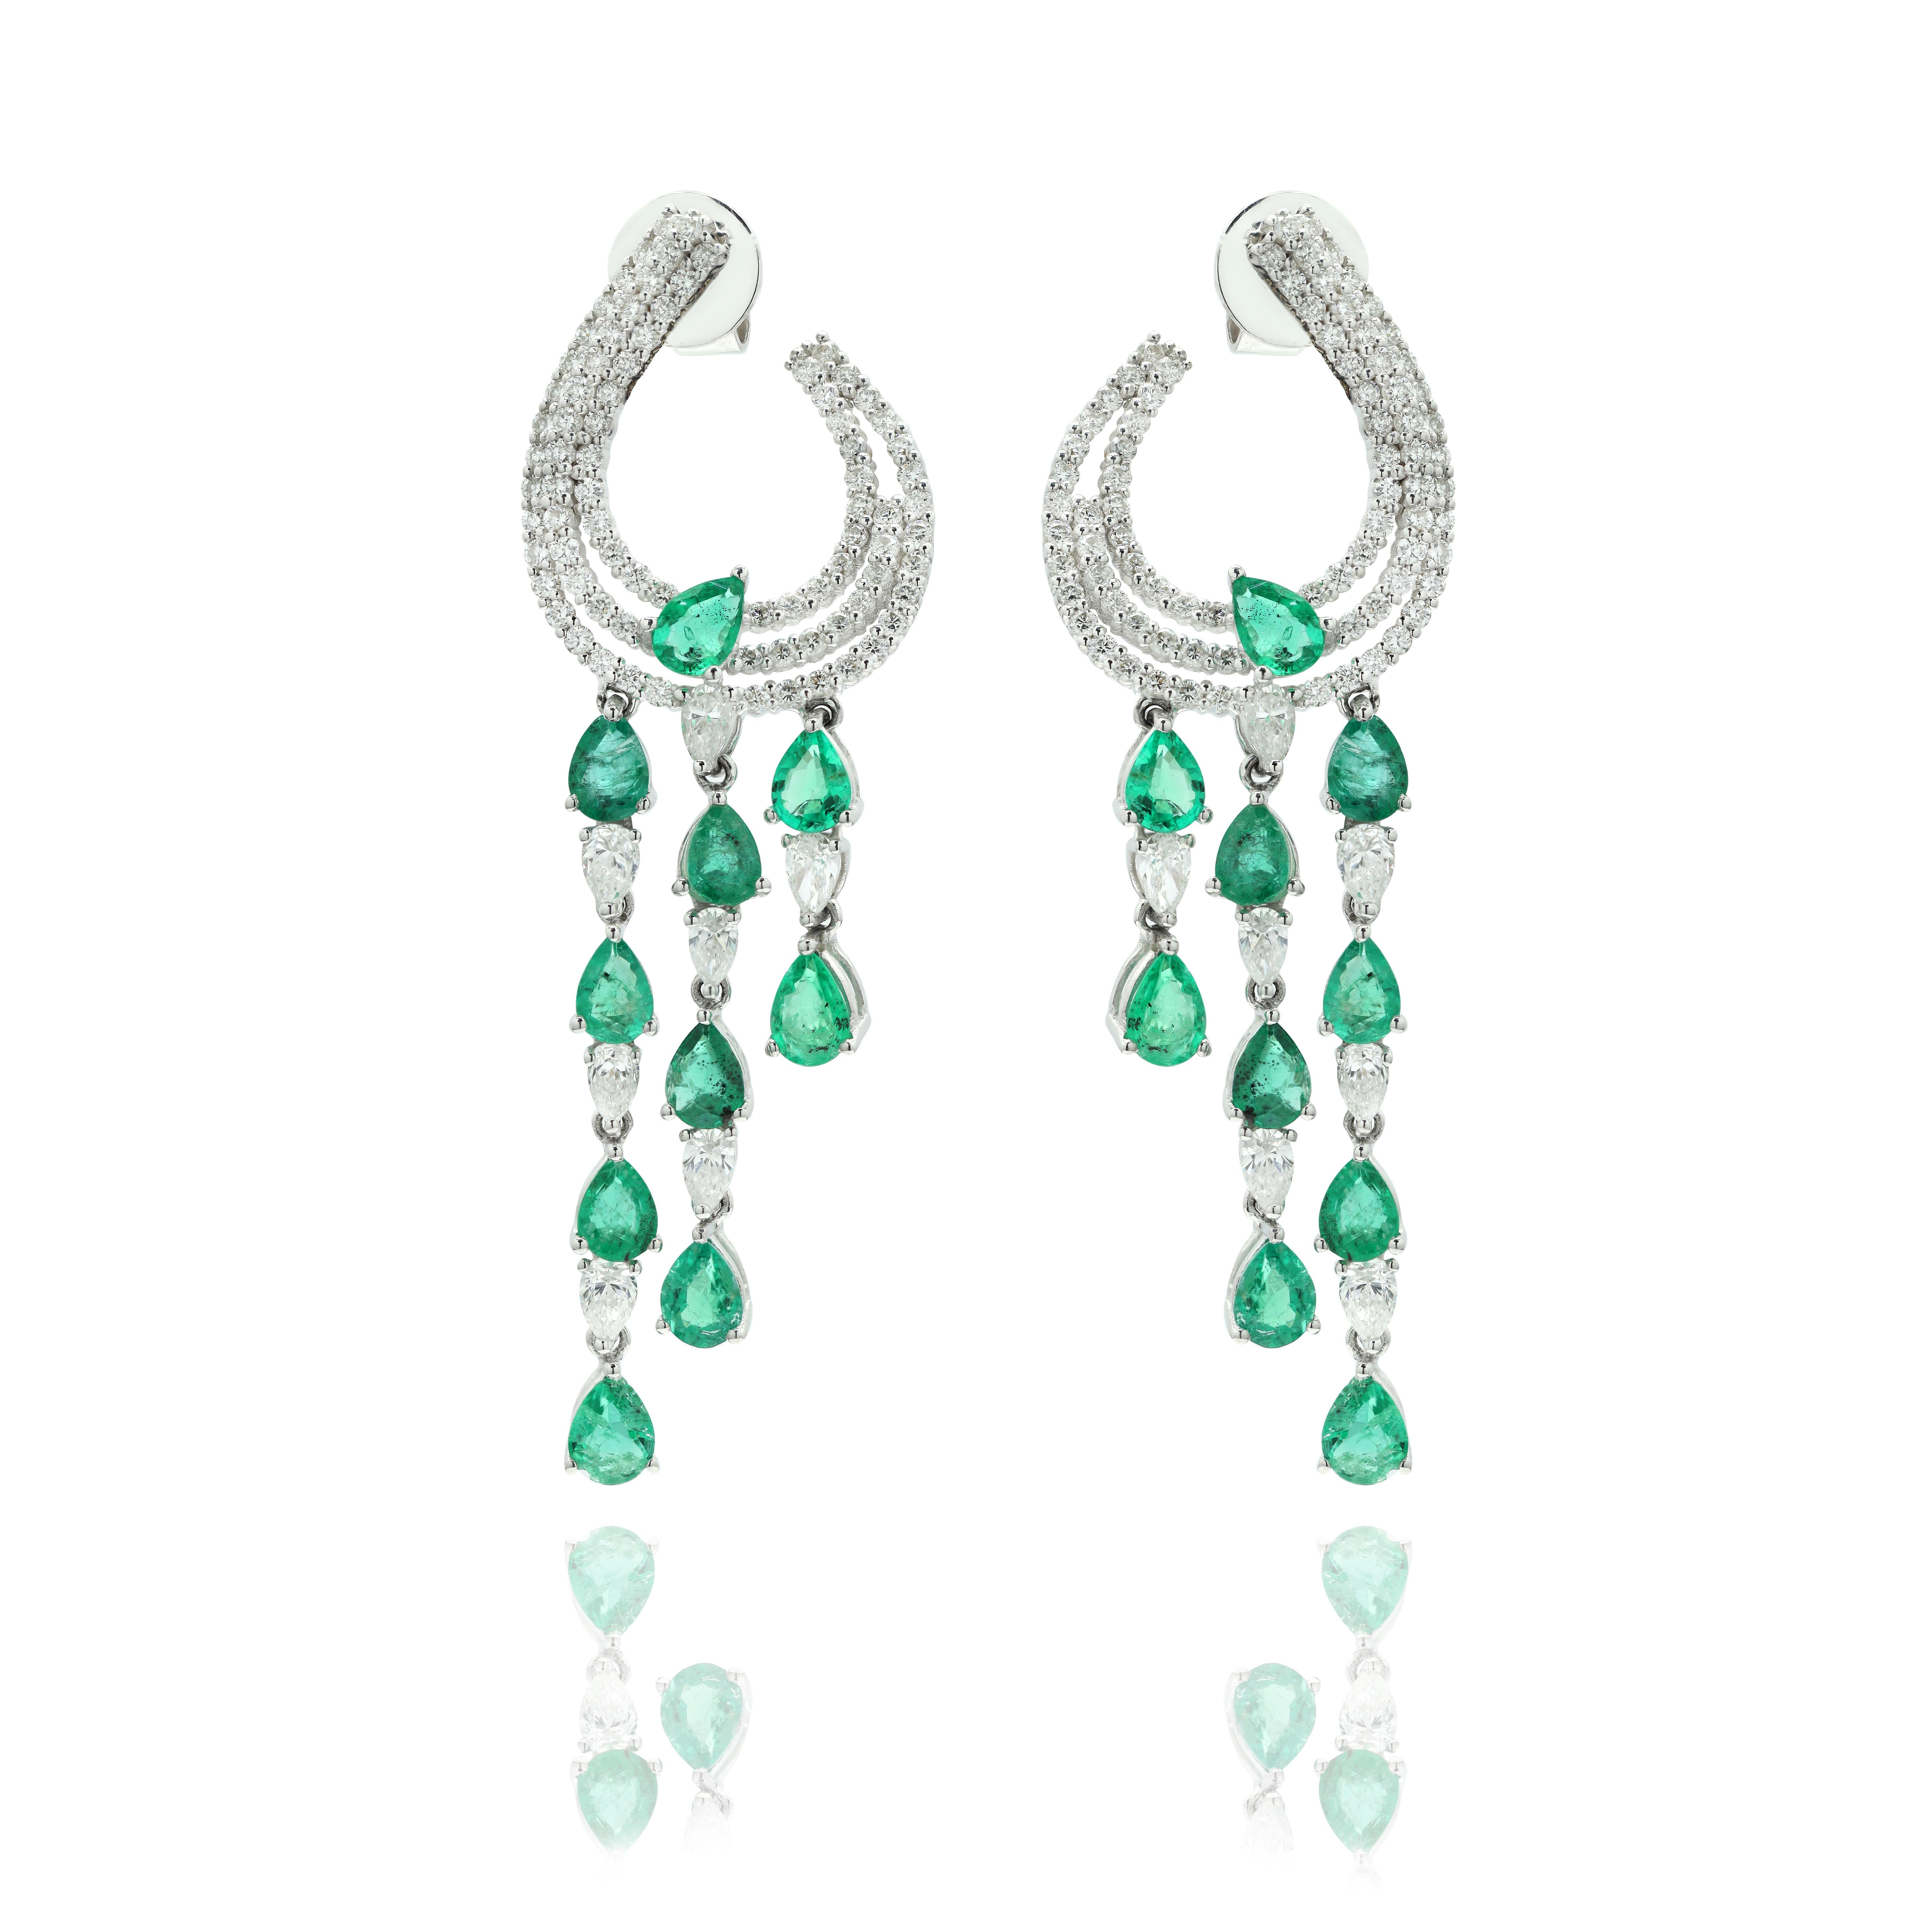 Emerald and Diamond Dangle Earrings to make a statement with your look. These earrings create a sparkling, luxurious look featuring pear cut gemstone.
If you love to gravitate towards unique styles, this piece of jewelry is perfect for you.

PRODUCT